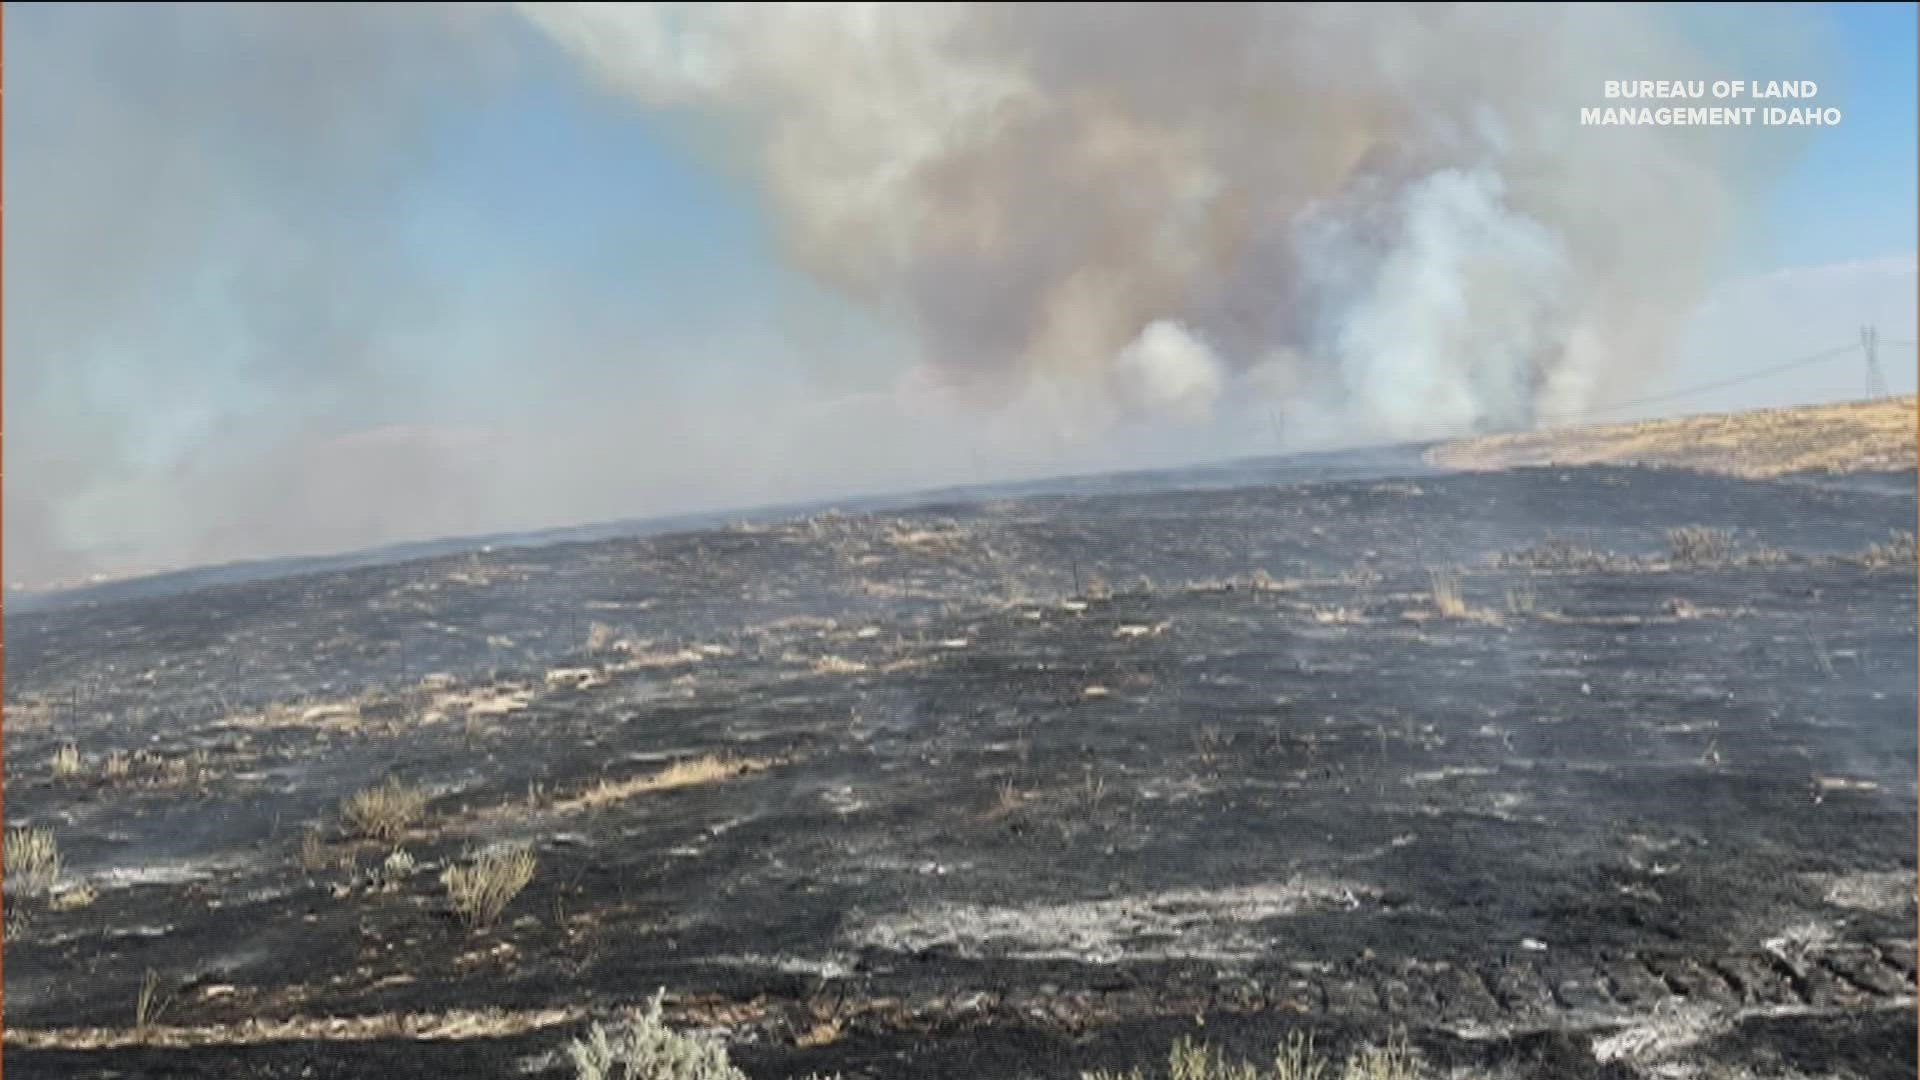 The Bureau of Land Management responded to three fires, including the Doubletapp Fire near I-84 and Simco Road.